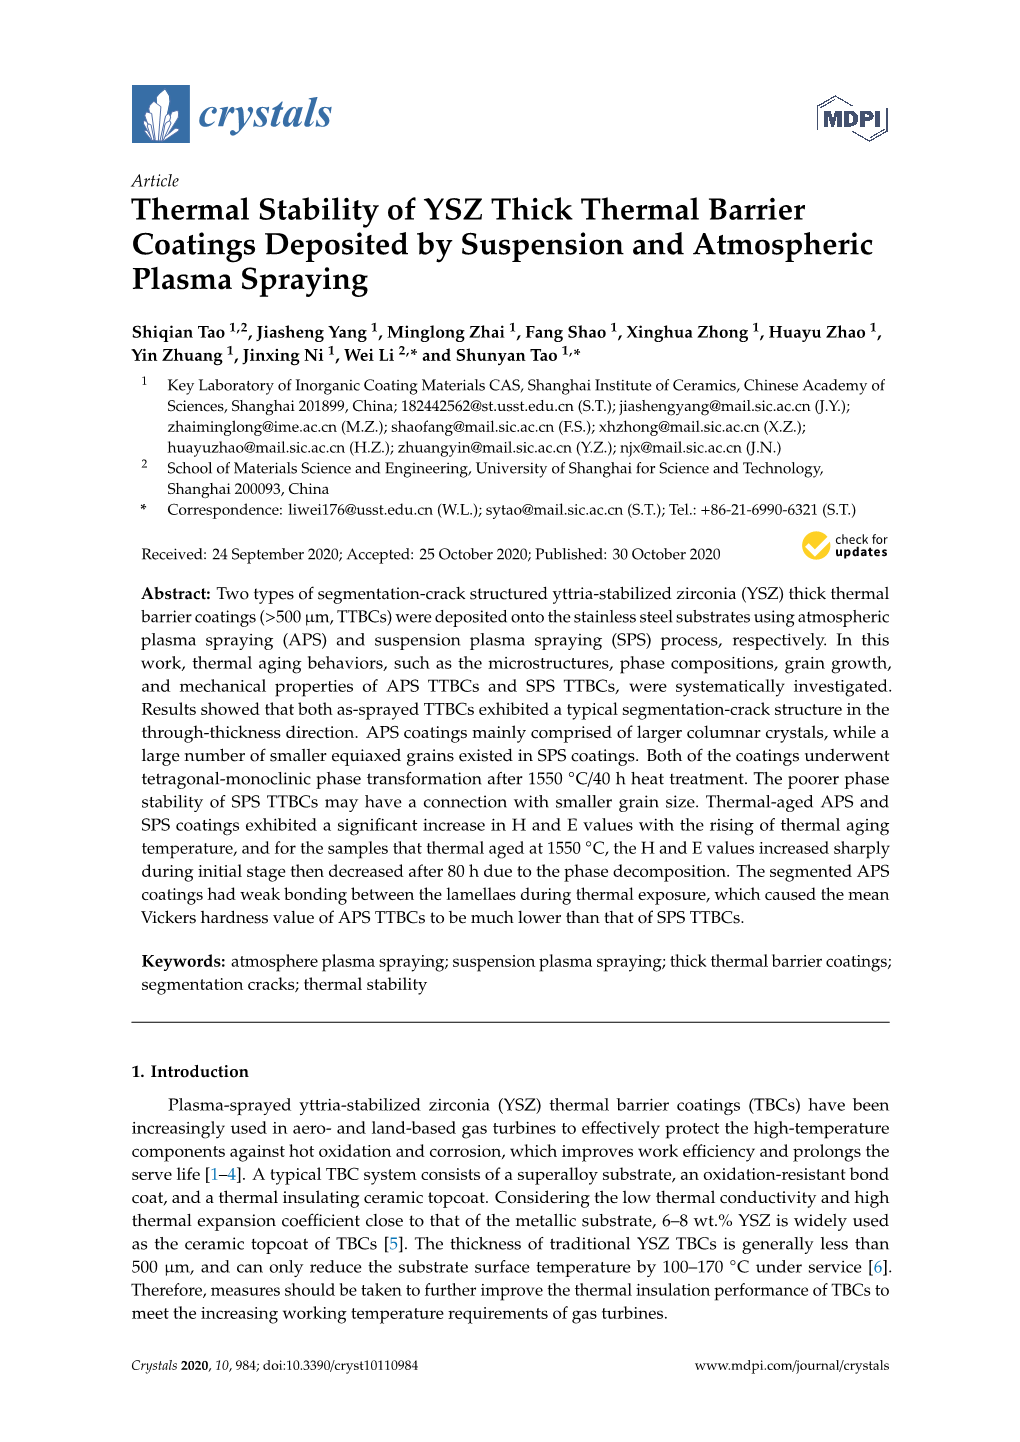 Thermal Stability of YSZ Thick Thermal Barrier Coatings Deposited by Suspension and Atmospheric Plasma Spraying